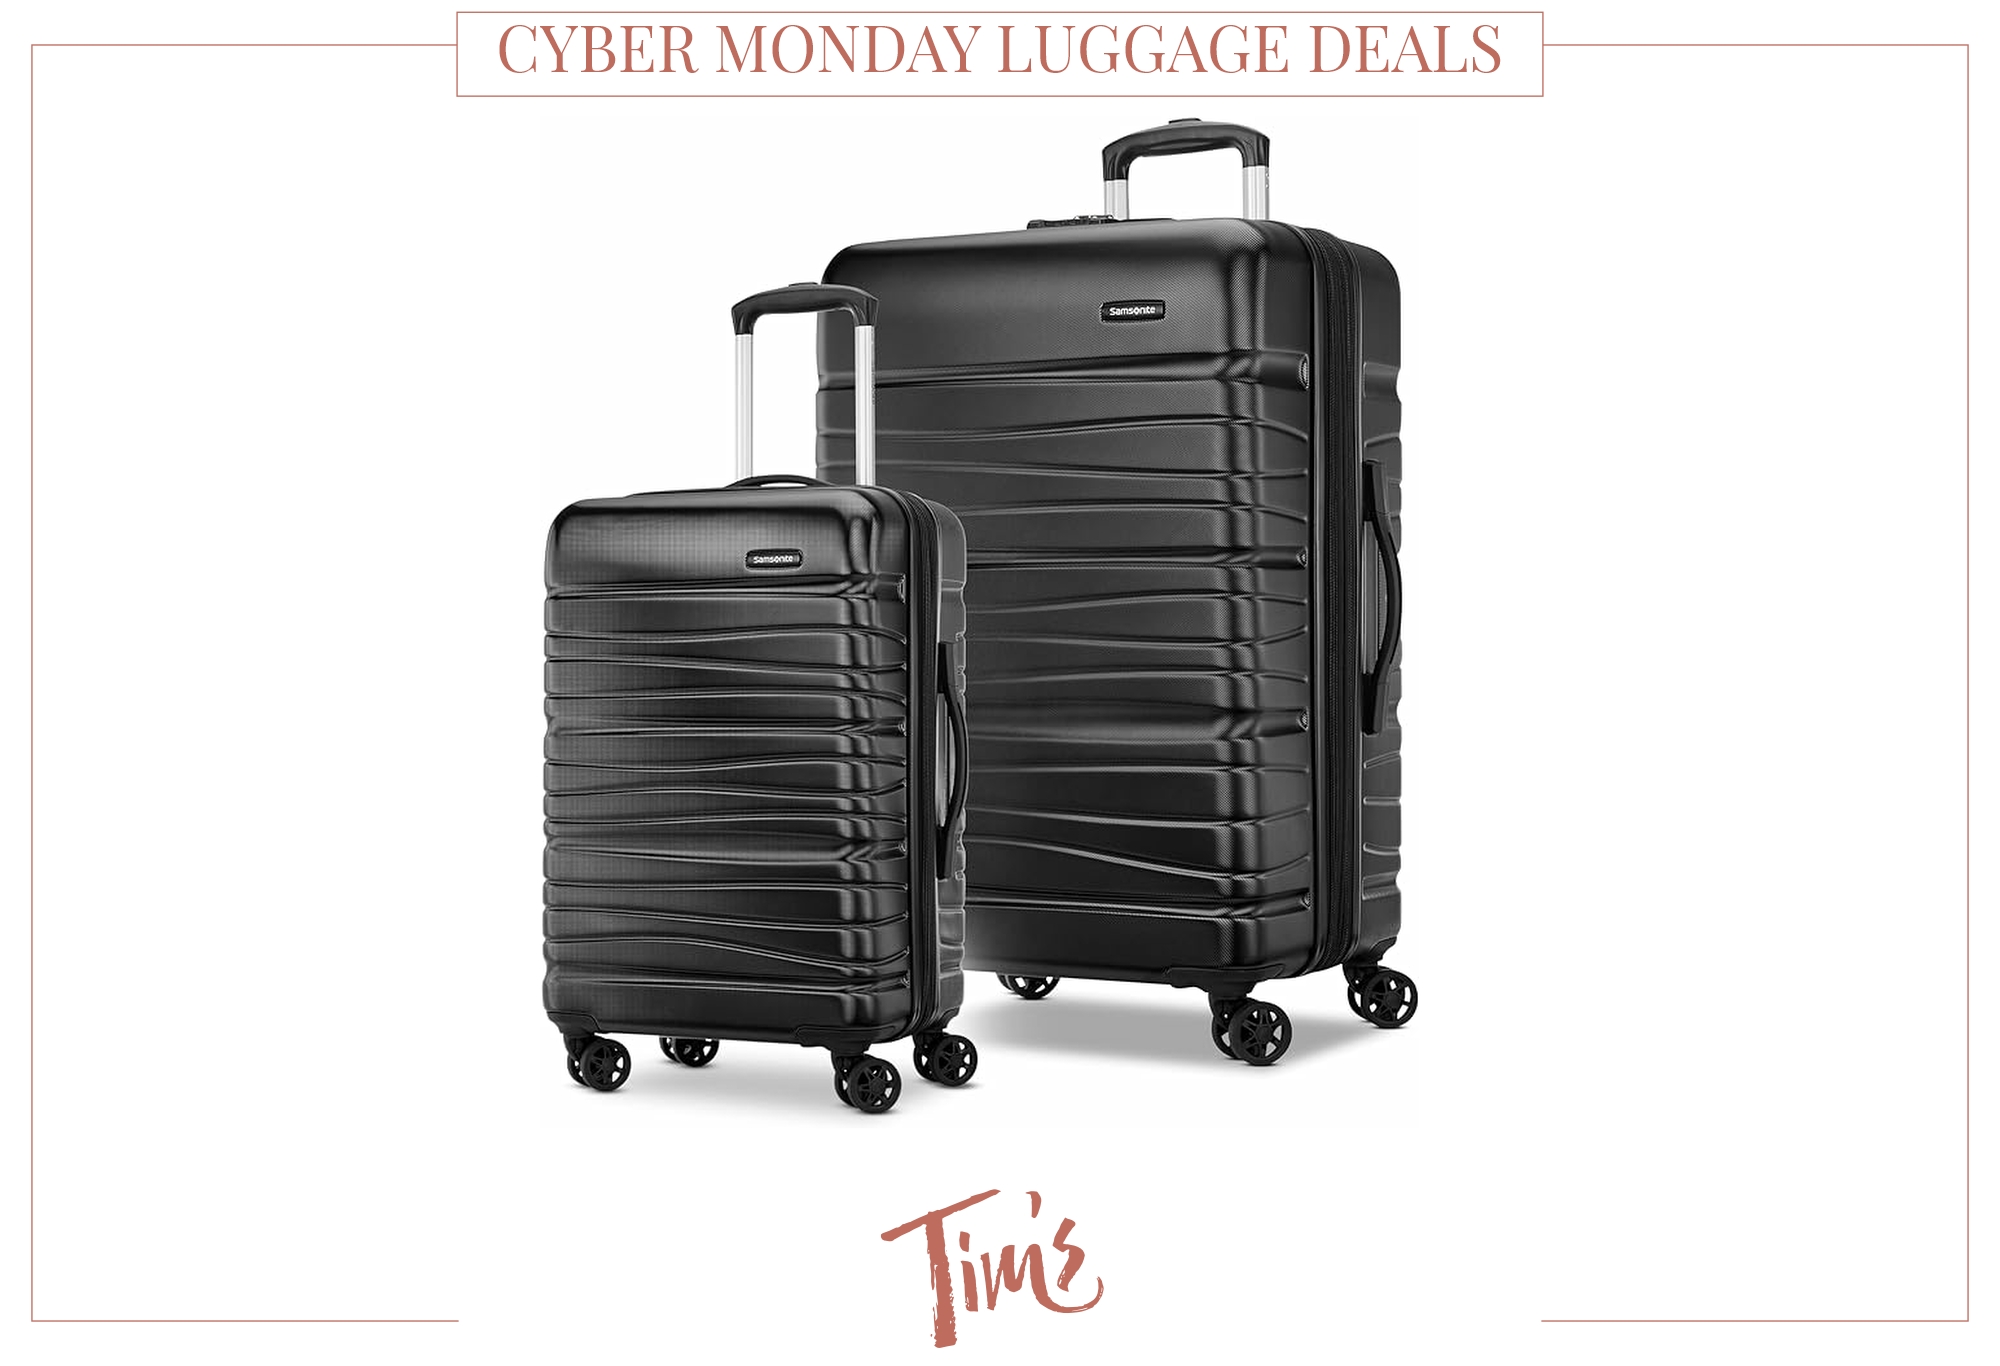 CYBER MONDAY LUGGAGE DEALS